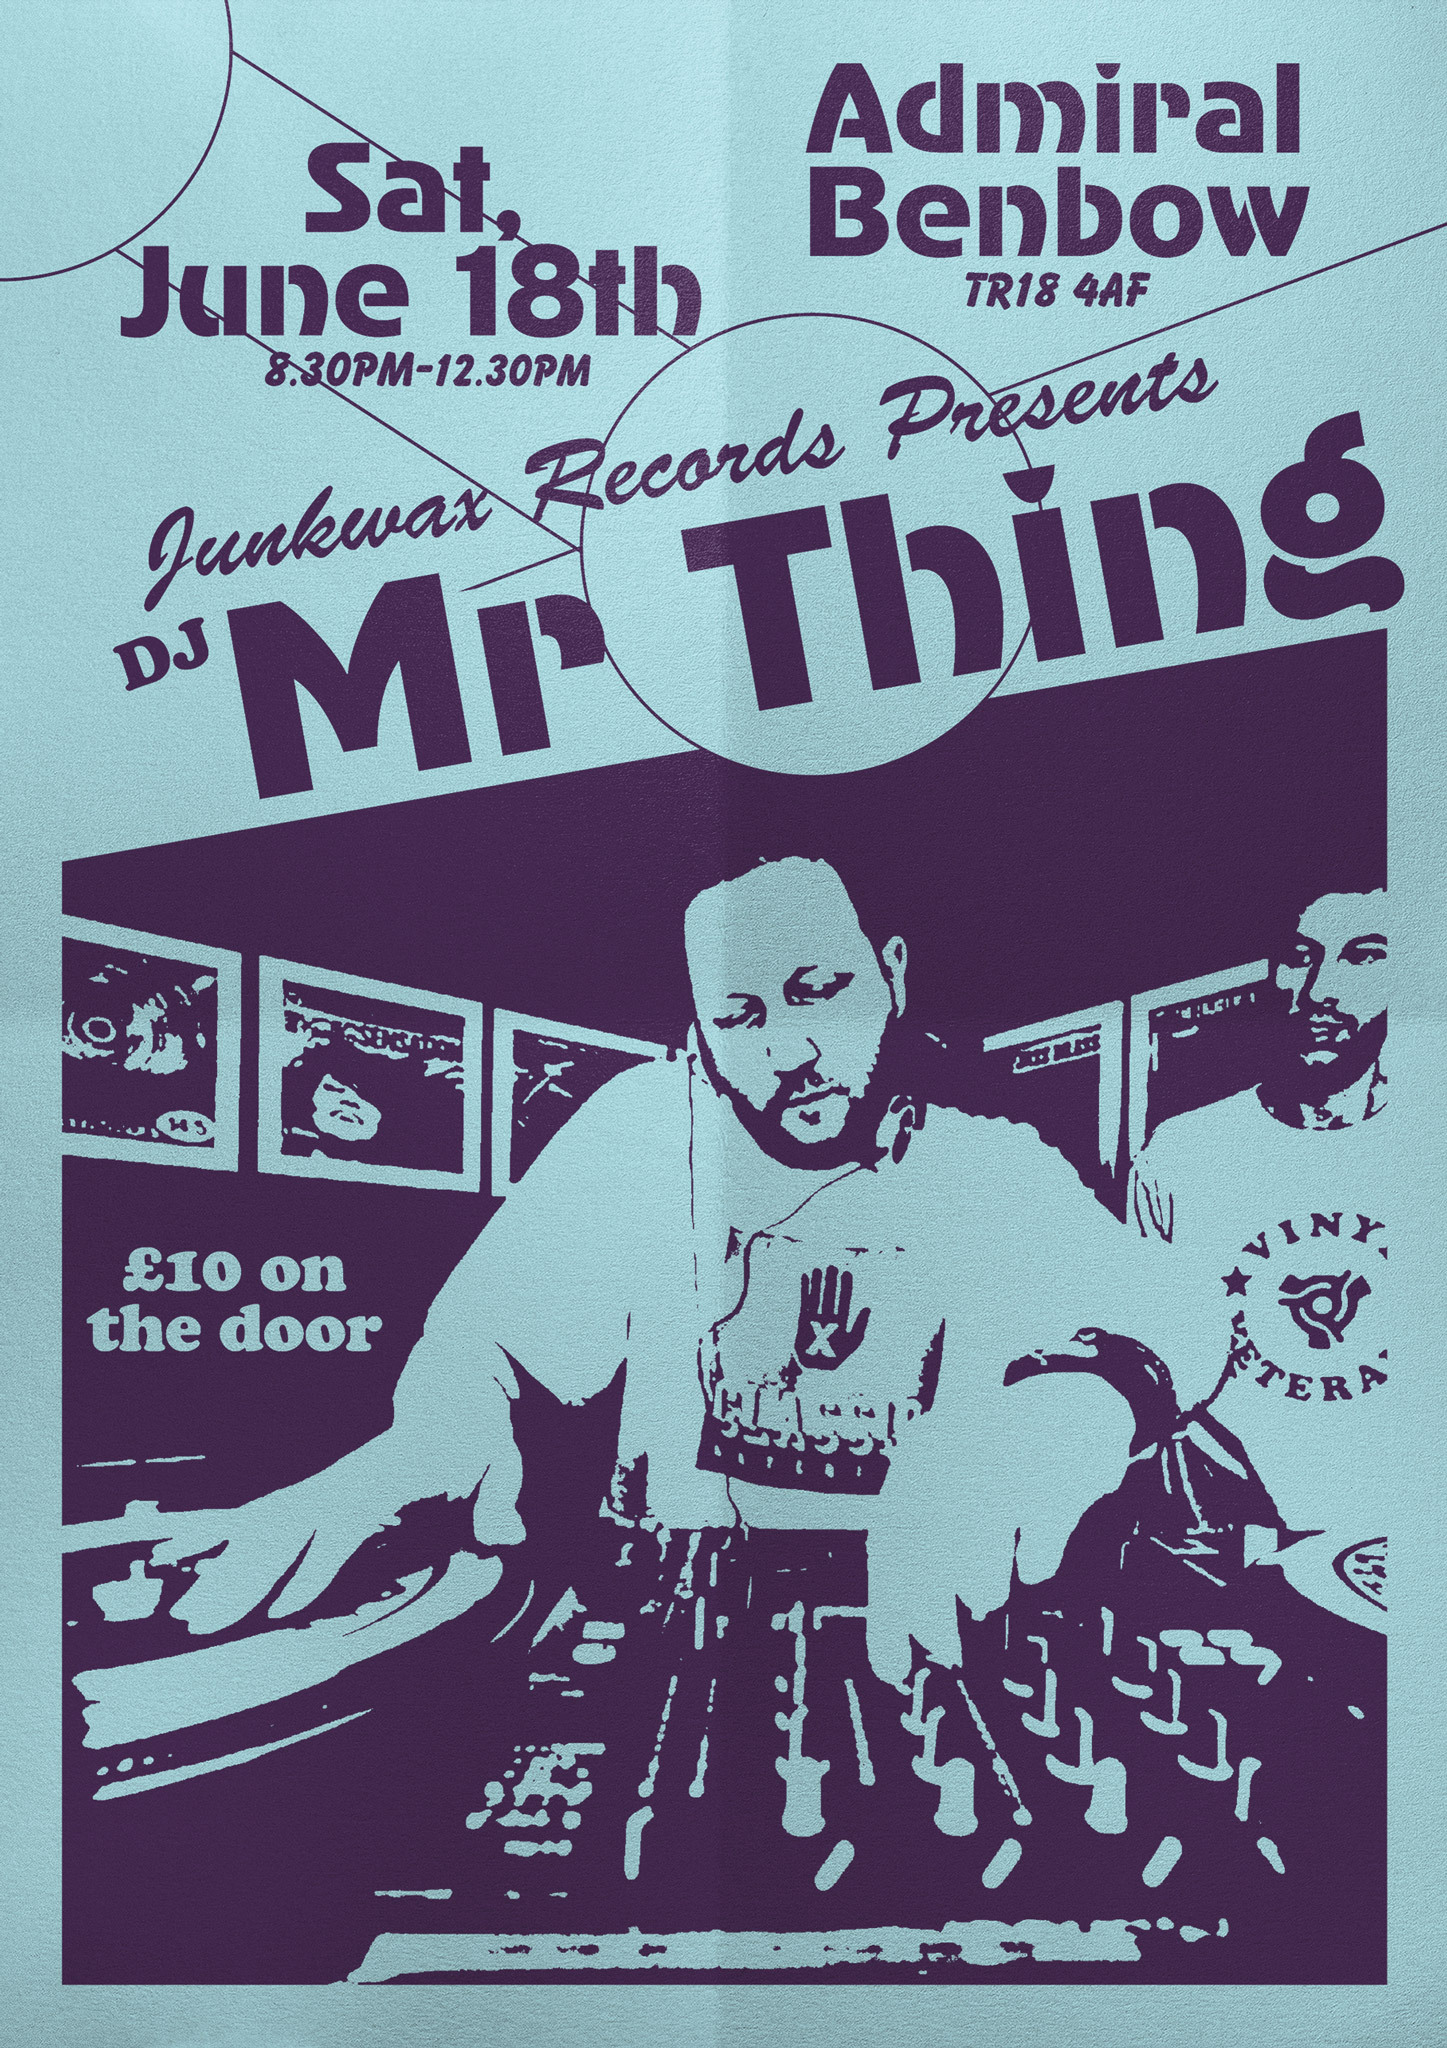 Junkwax mr thing poster